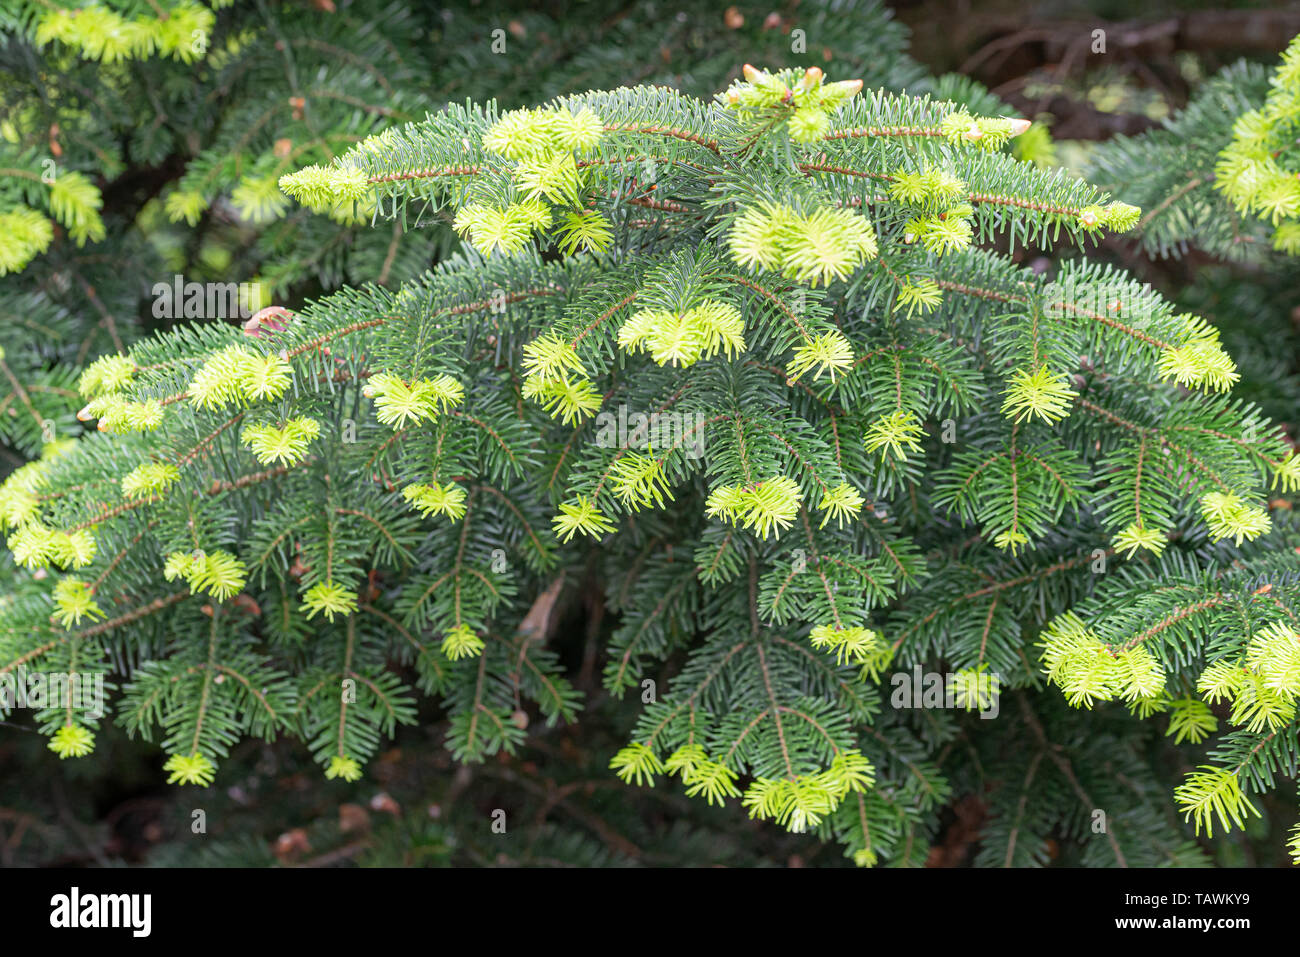 Young needles from Abies nordmanniana also known as Nordmann fir or Caucasian fir. The new needles are a tender green  color in spring Stock Photo